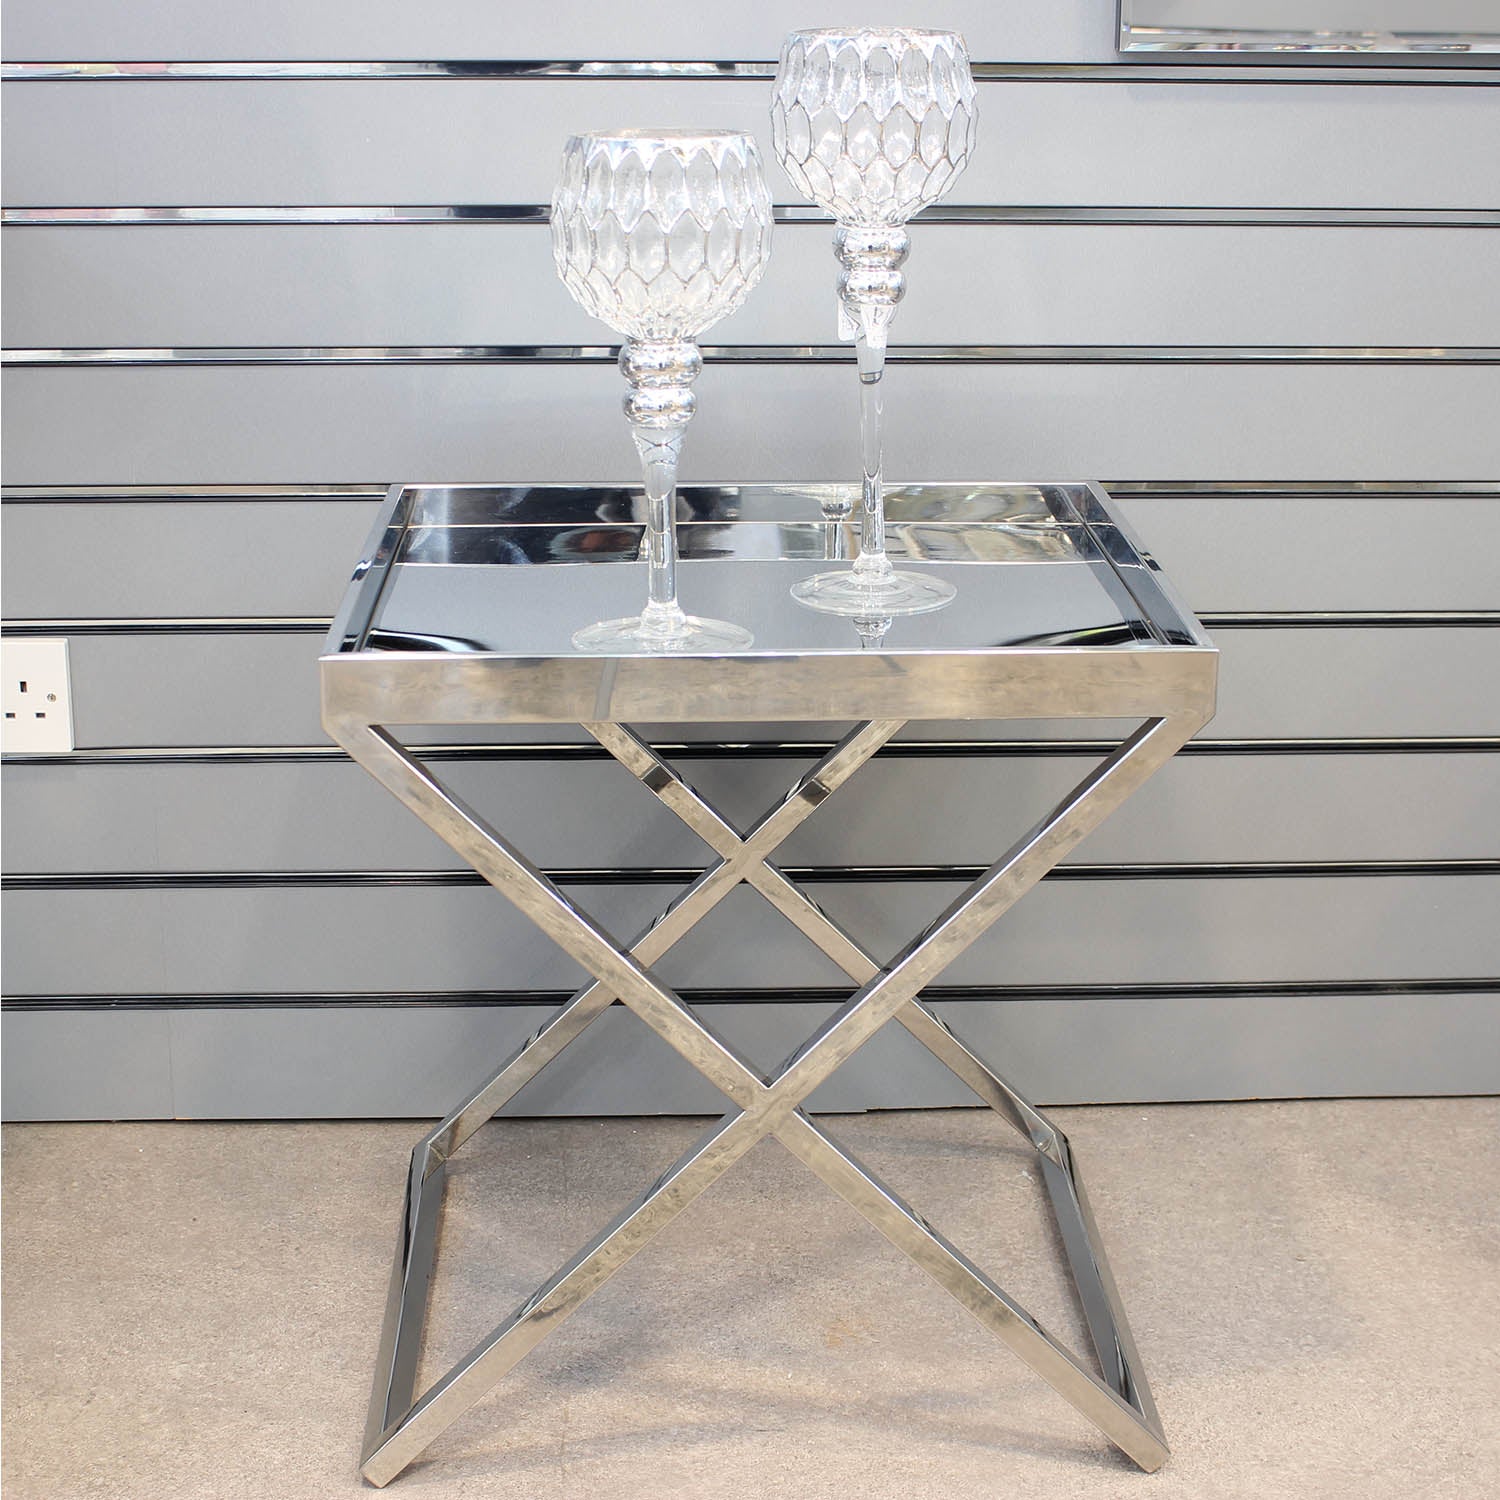 Stainless Steel Finish Table Sofa Tray